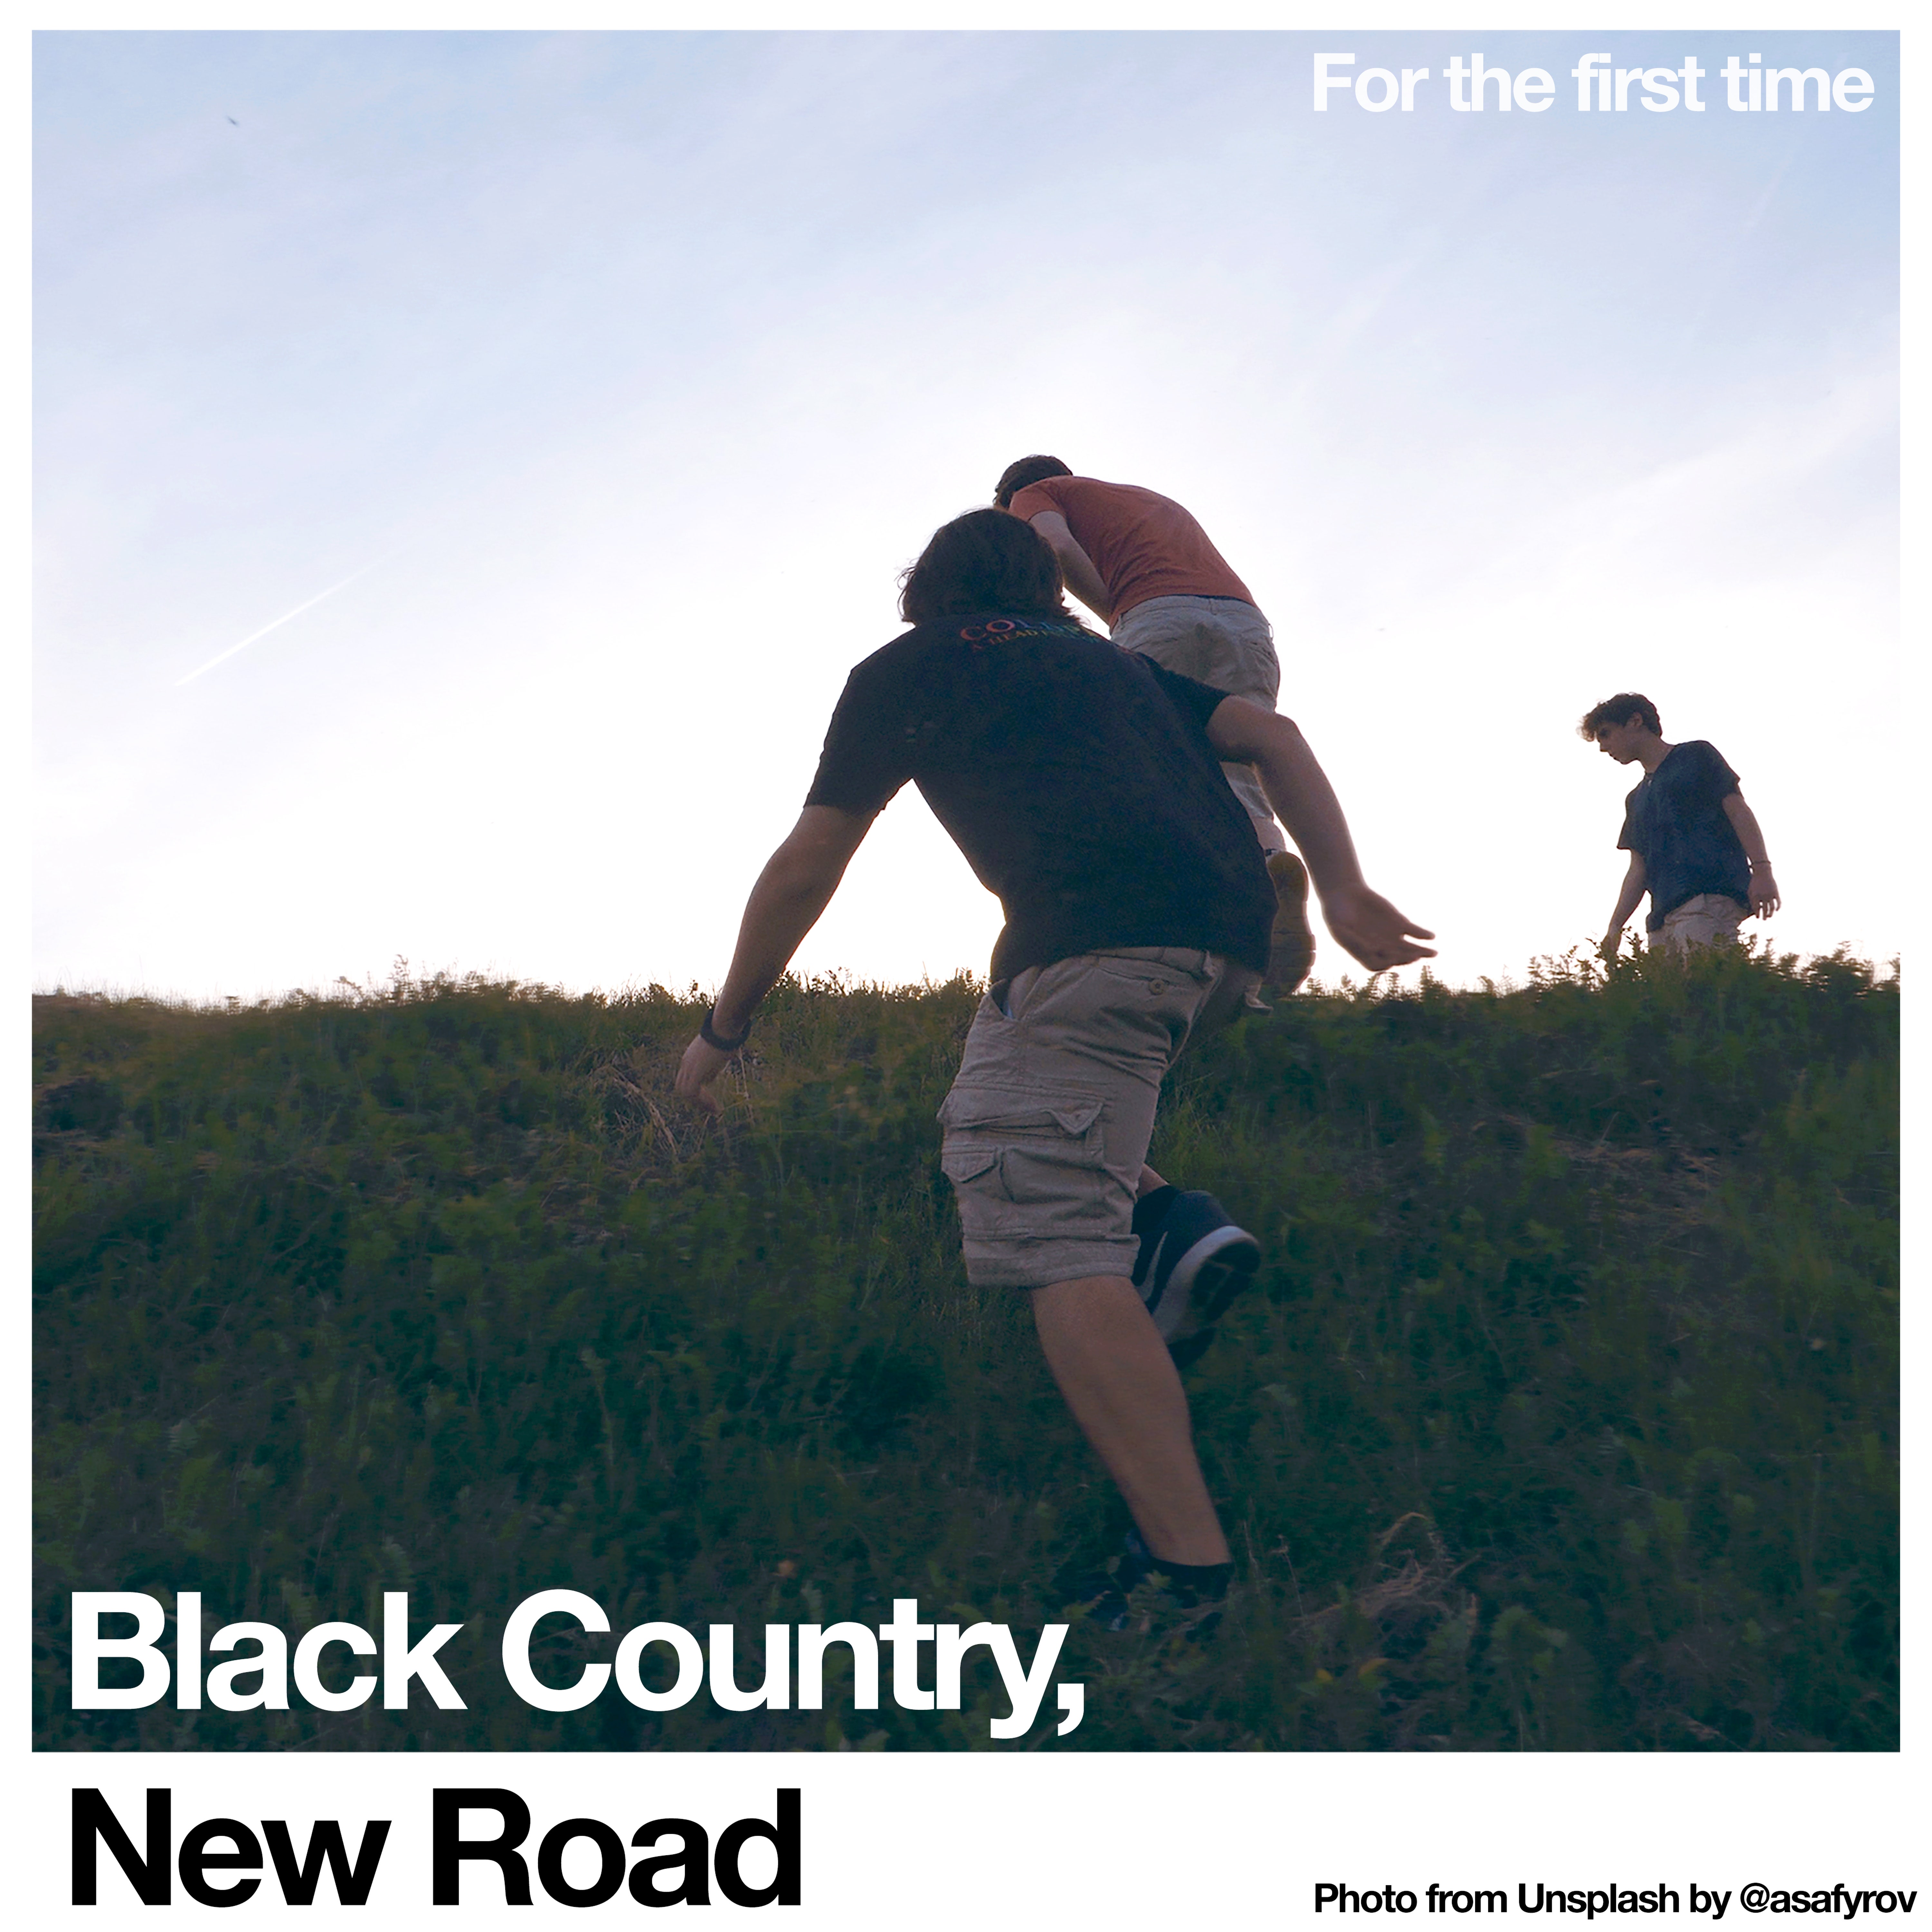 Black Country, New Road: For the first time Album Review